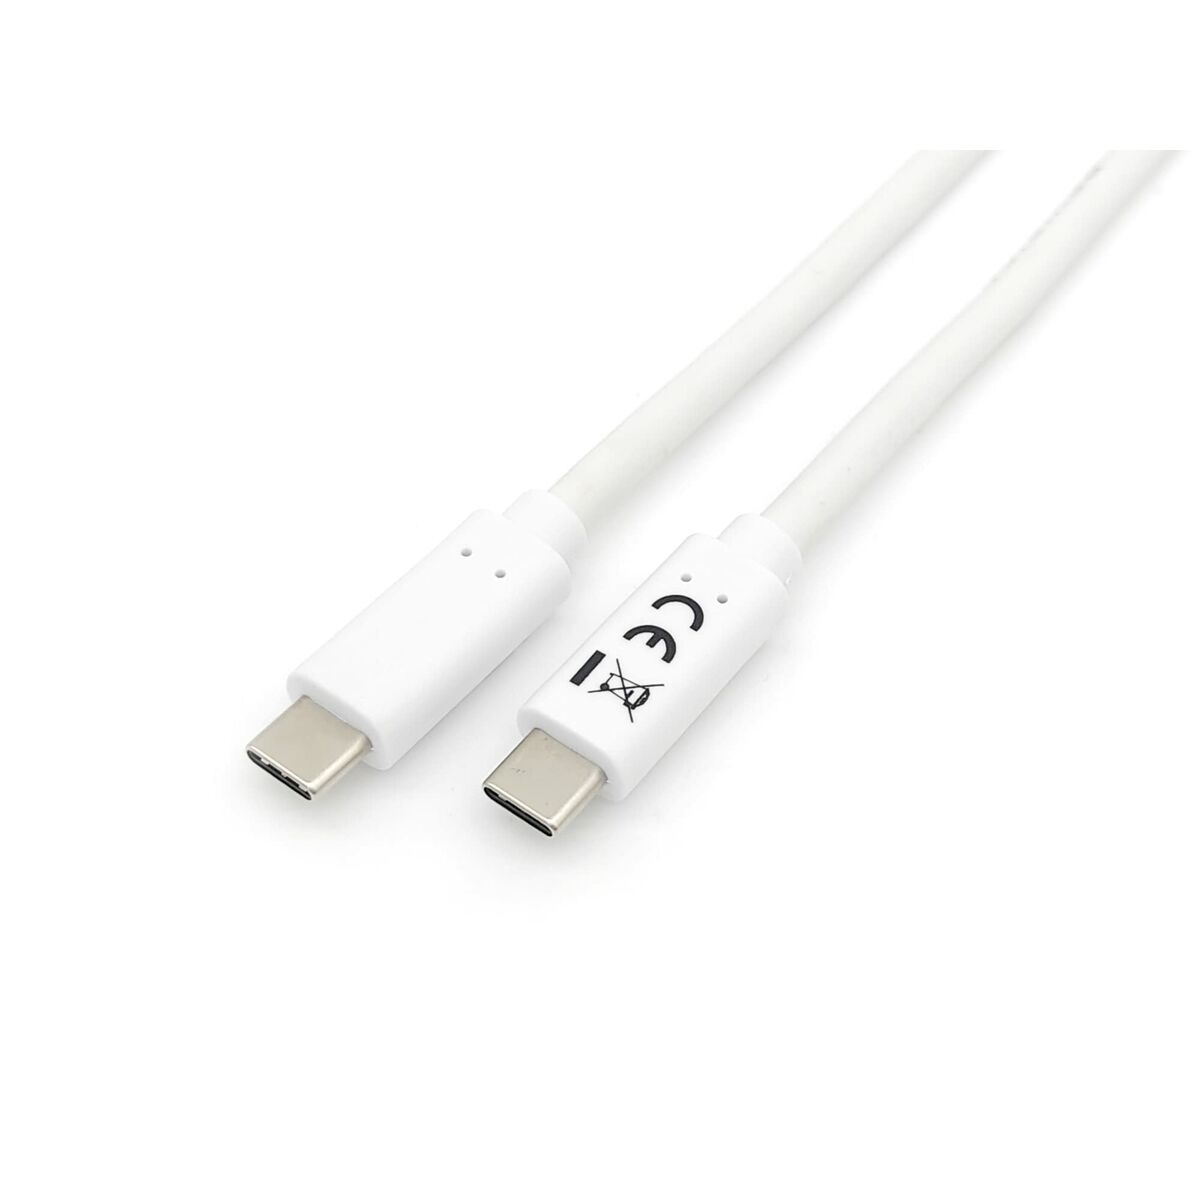 Cable USB C Equip 128362 White